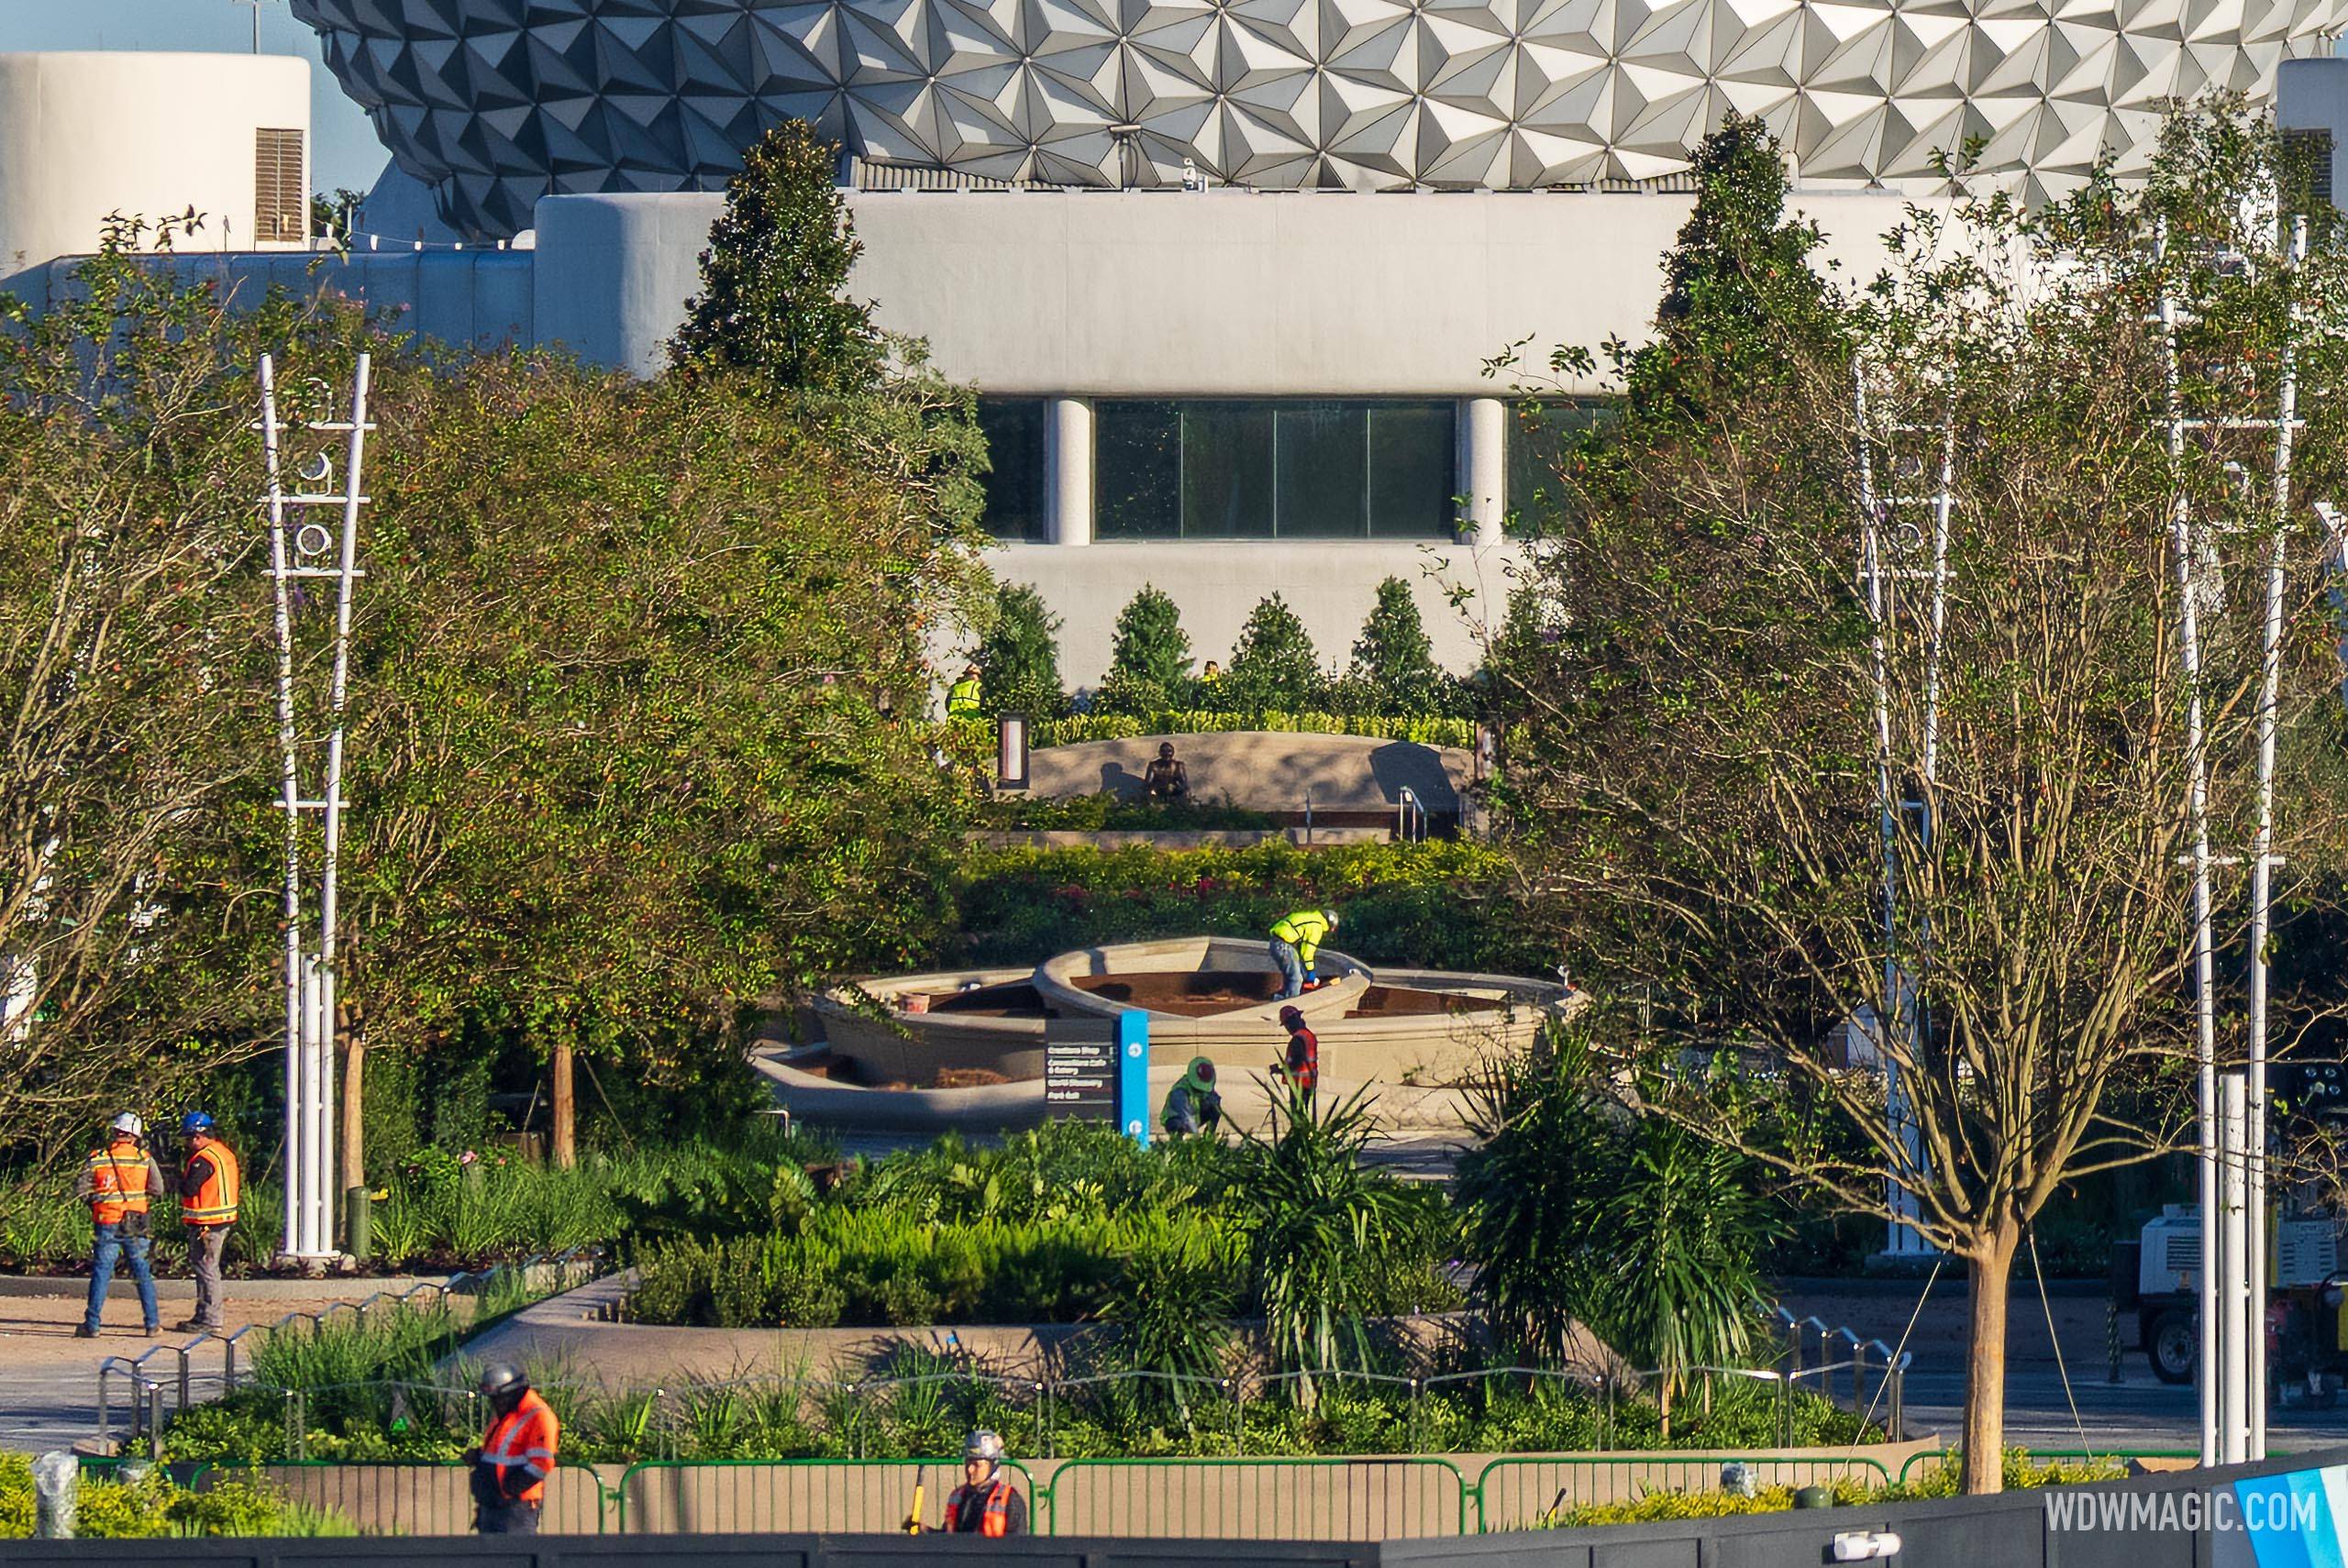 A look at the final touches underway for EPCOT's World Celebration Gardens and Dreamers Point